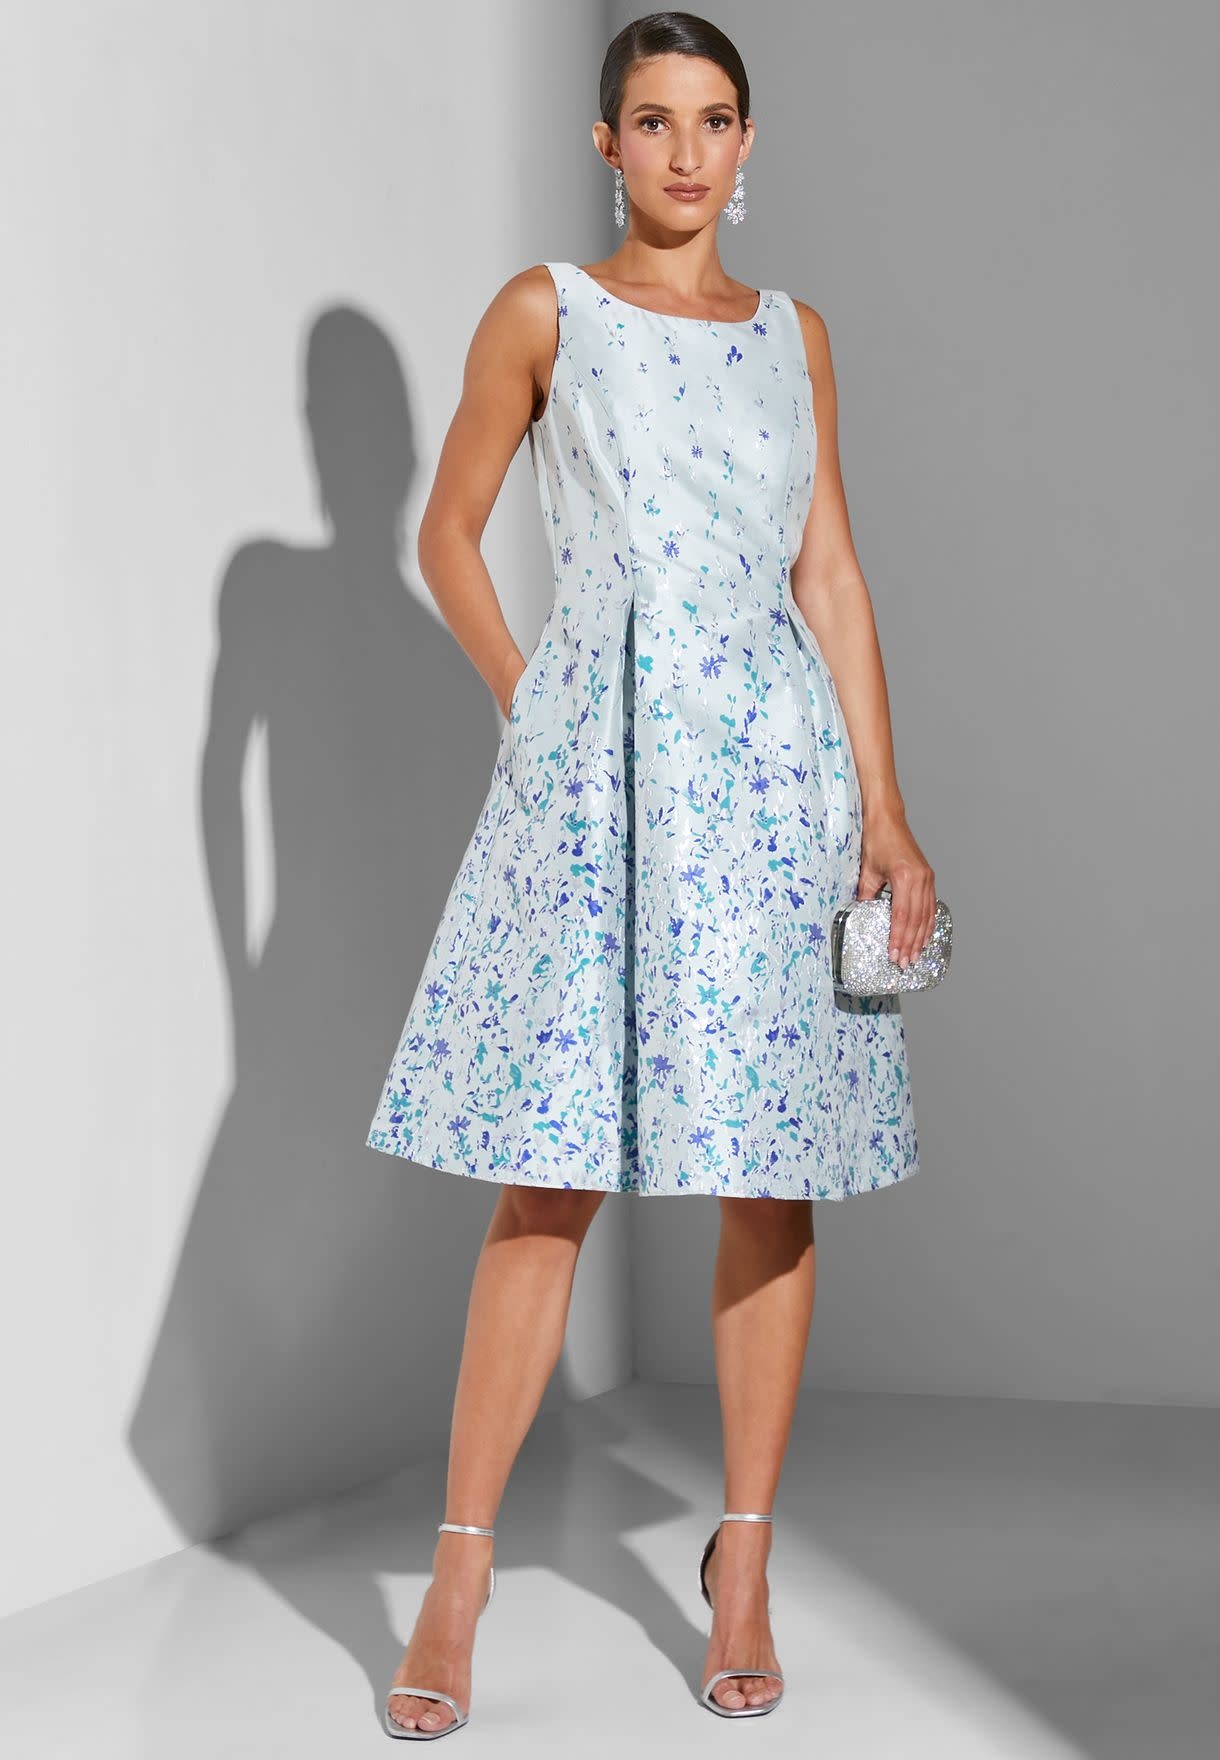 ADRIANNA PAPELL ADRIANNA PAPELL BORDER FLORAL JACQUARD DRESSES